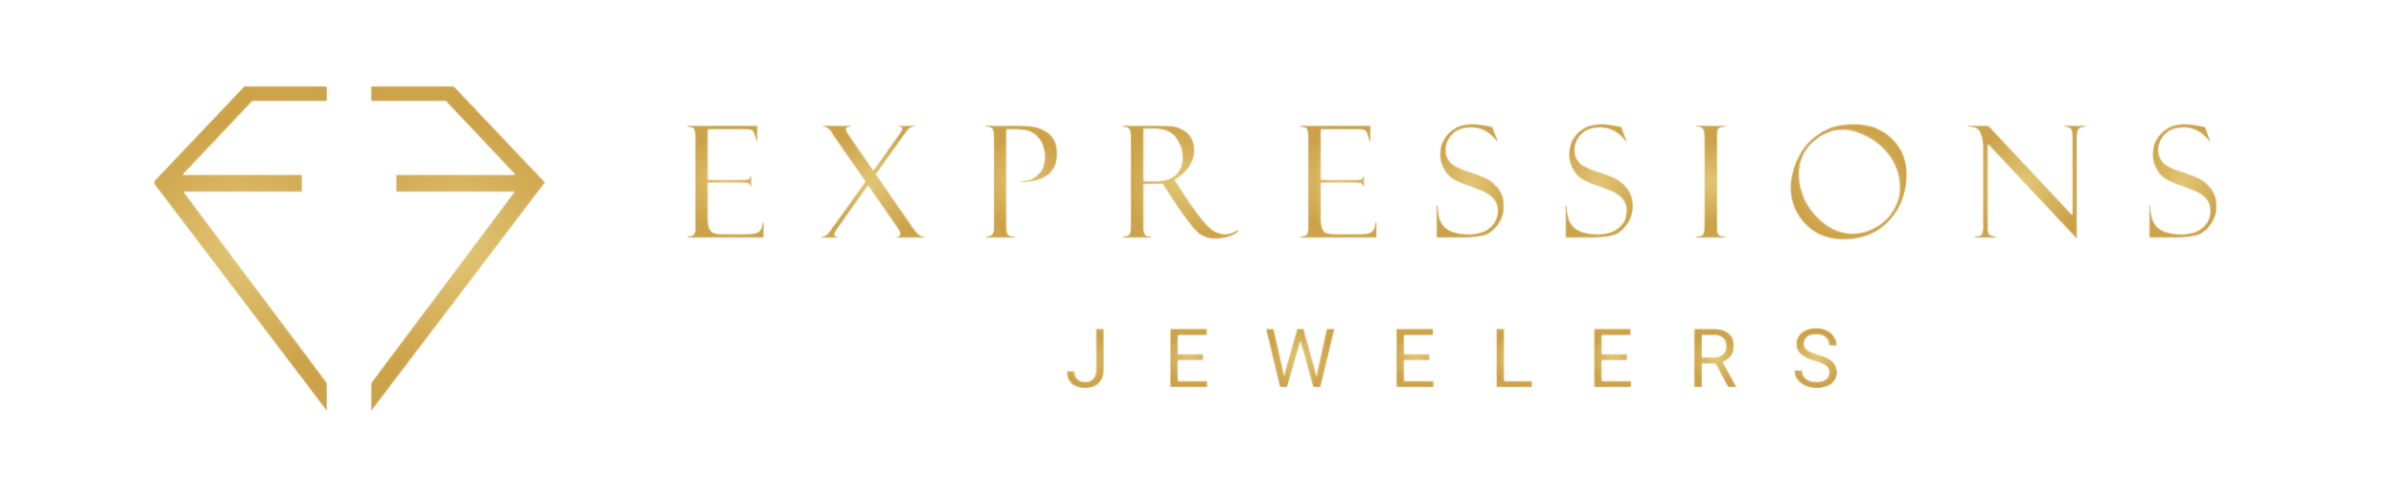 Expressions Jewelers